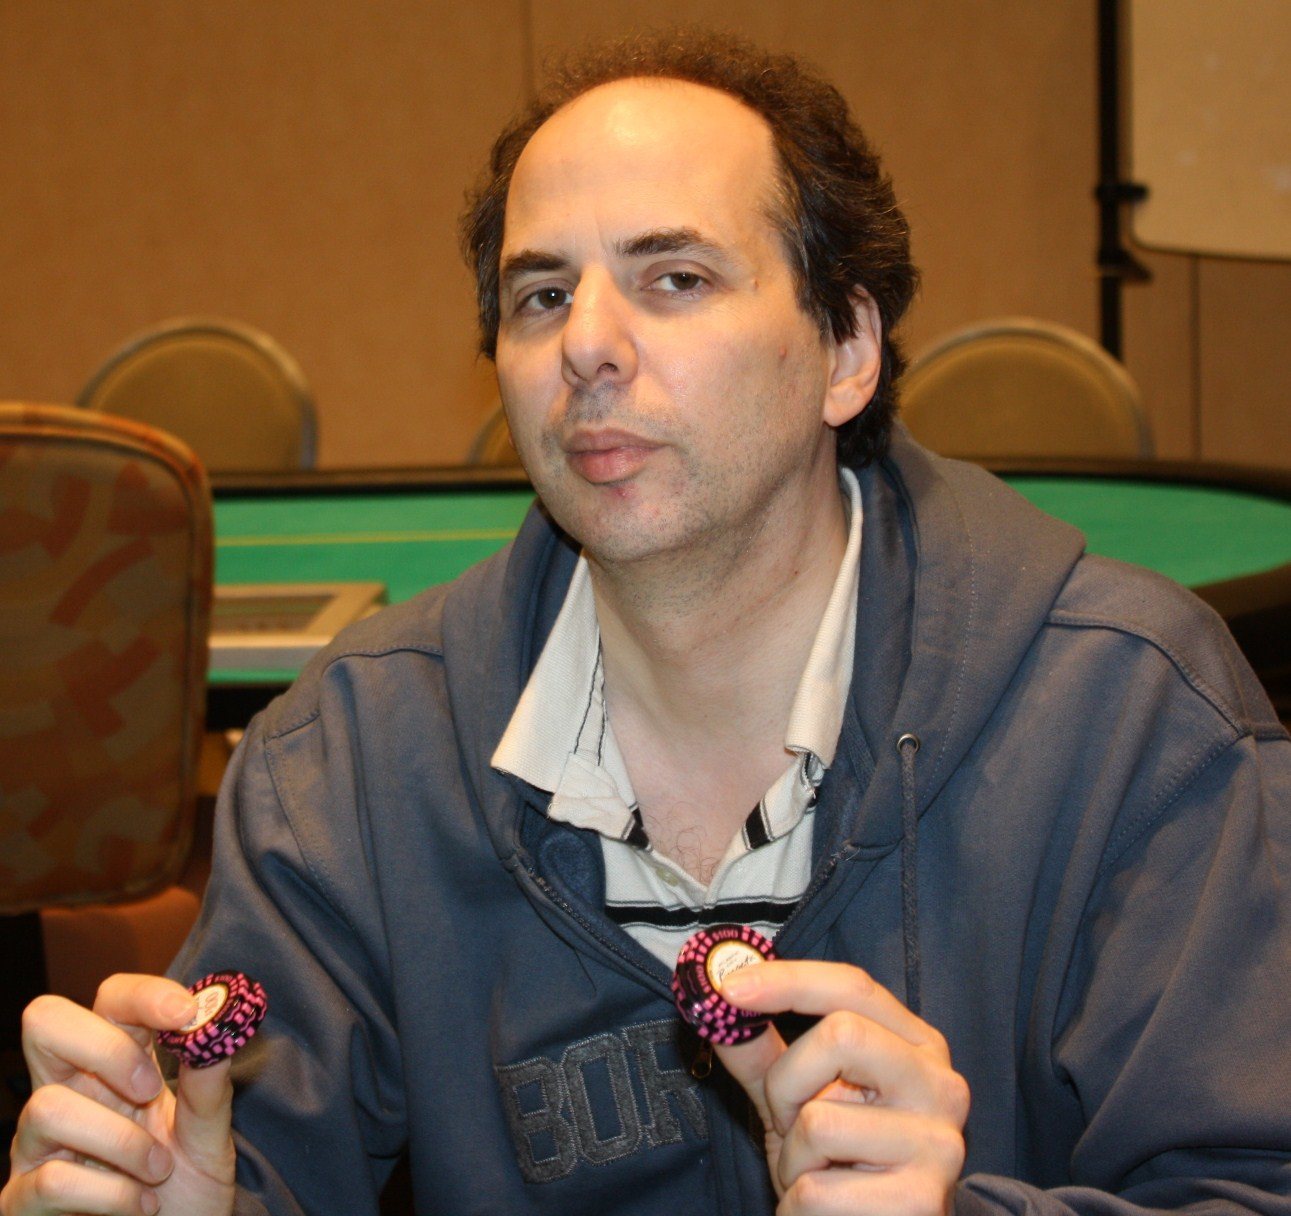 Exclusive Interview: Allen Kessler Talks to CardsChat About Tournament Structures, Chainsaw Levels, and the World Series of Poker